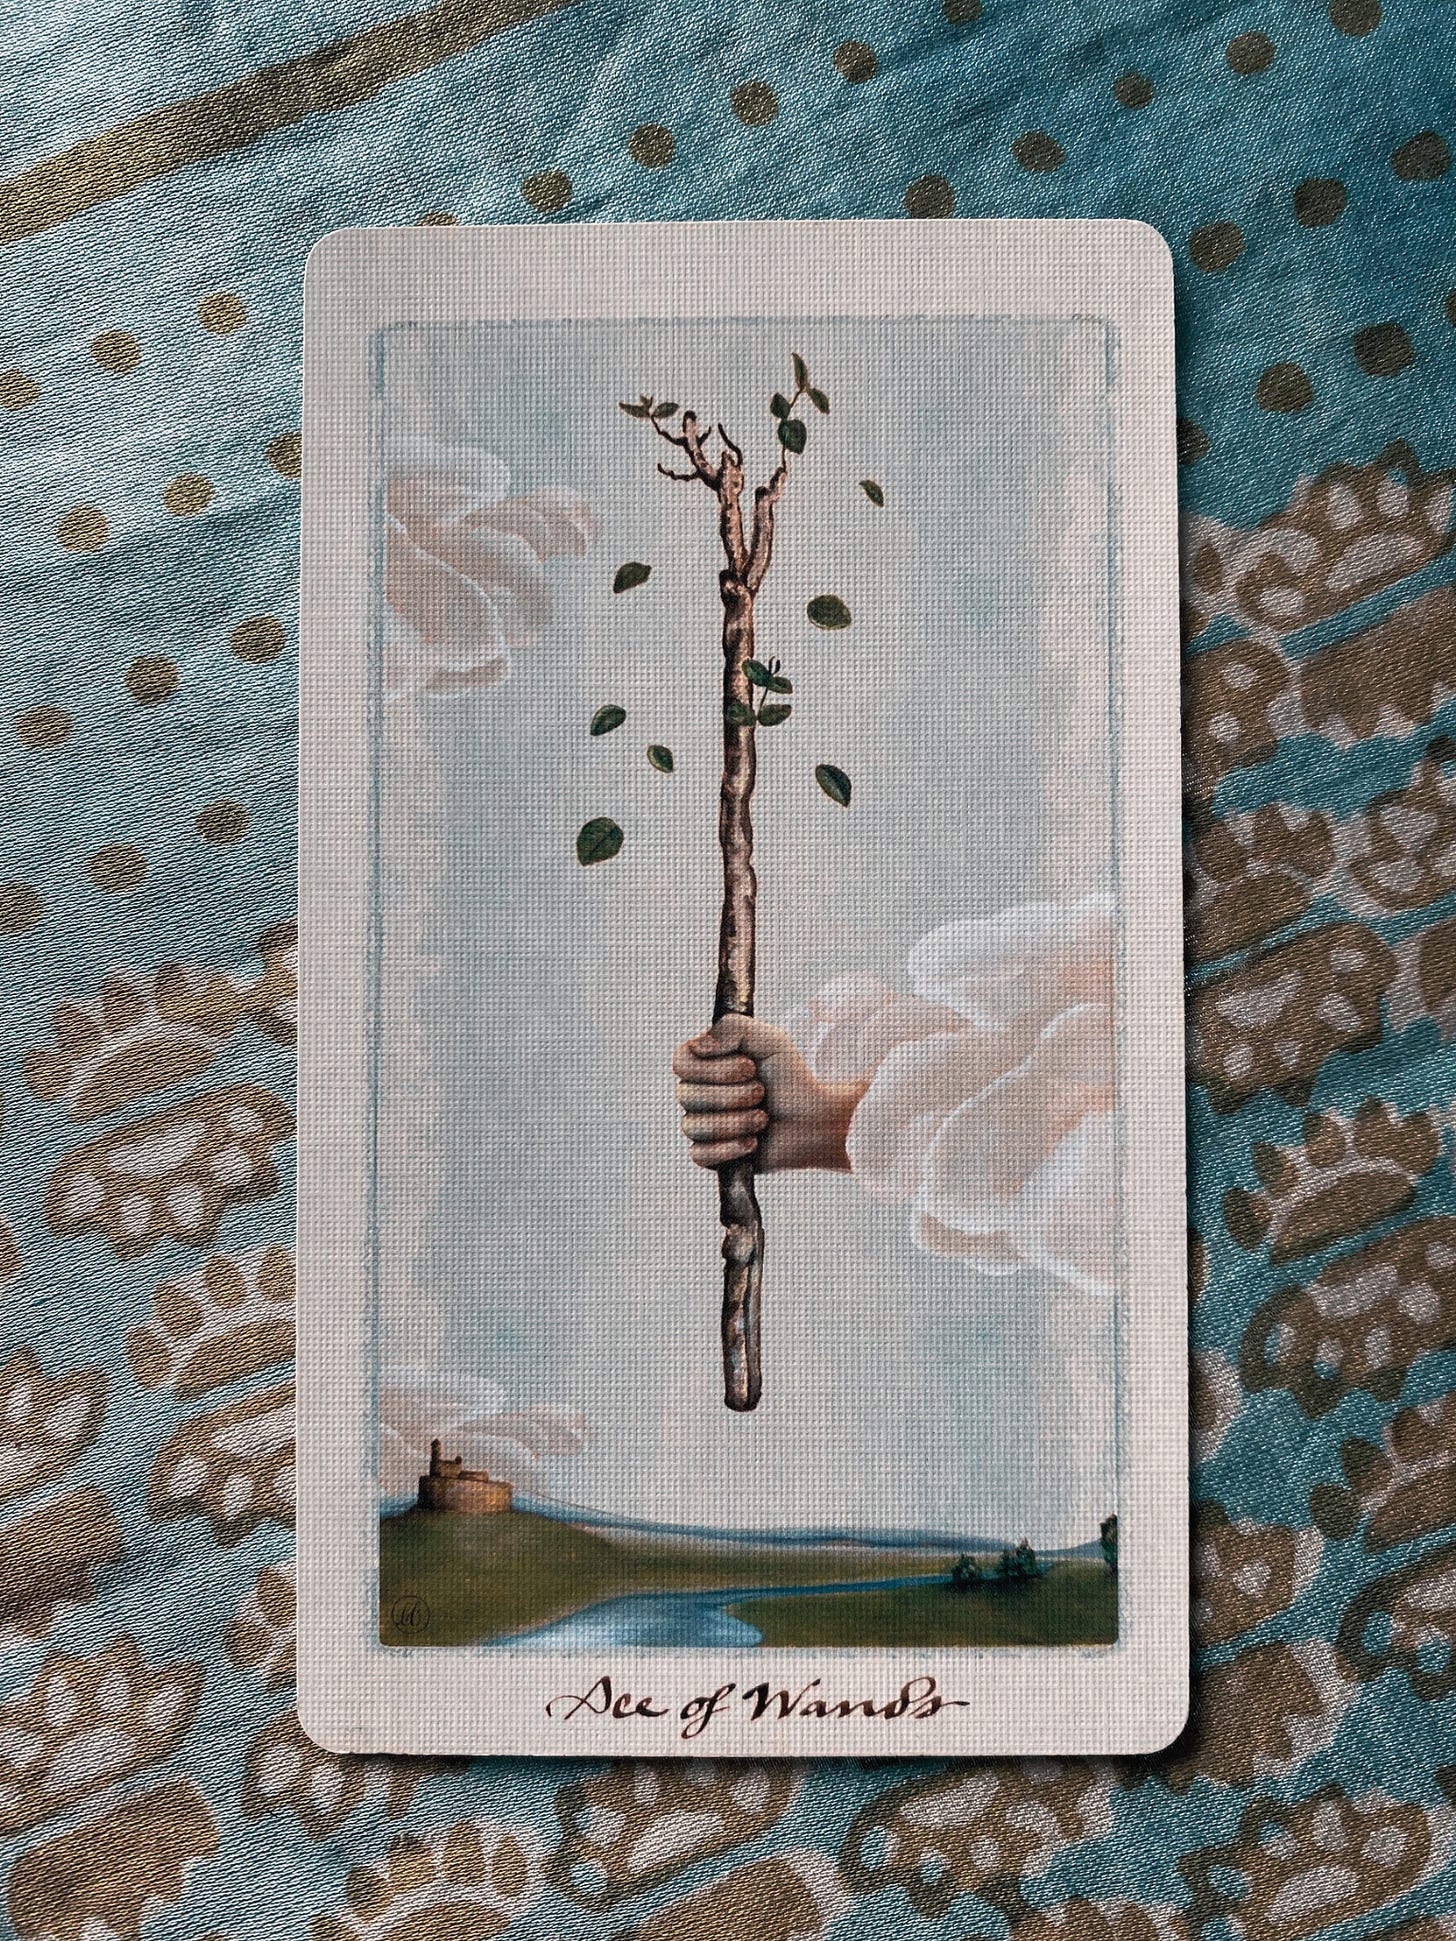 a photo of the ace of wands from the pagan otherworlds tarot laying atop a muted teal silk cloth. the cloth has golden prints of circles and flower-like suns and a golden lined border. the ace of wands card shows a branch upright, held in a firm pale hand that extends from a cloud in a light blue sky. green leaves fall gently from the buds at the top of the branch. below the branch is a river running through a green country, trees in the foreground and one side, and a castle on a hill in the background of the other side. behind the scene, the river flows into the dark blue shadow of far distant mountains.